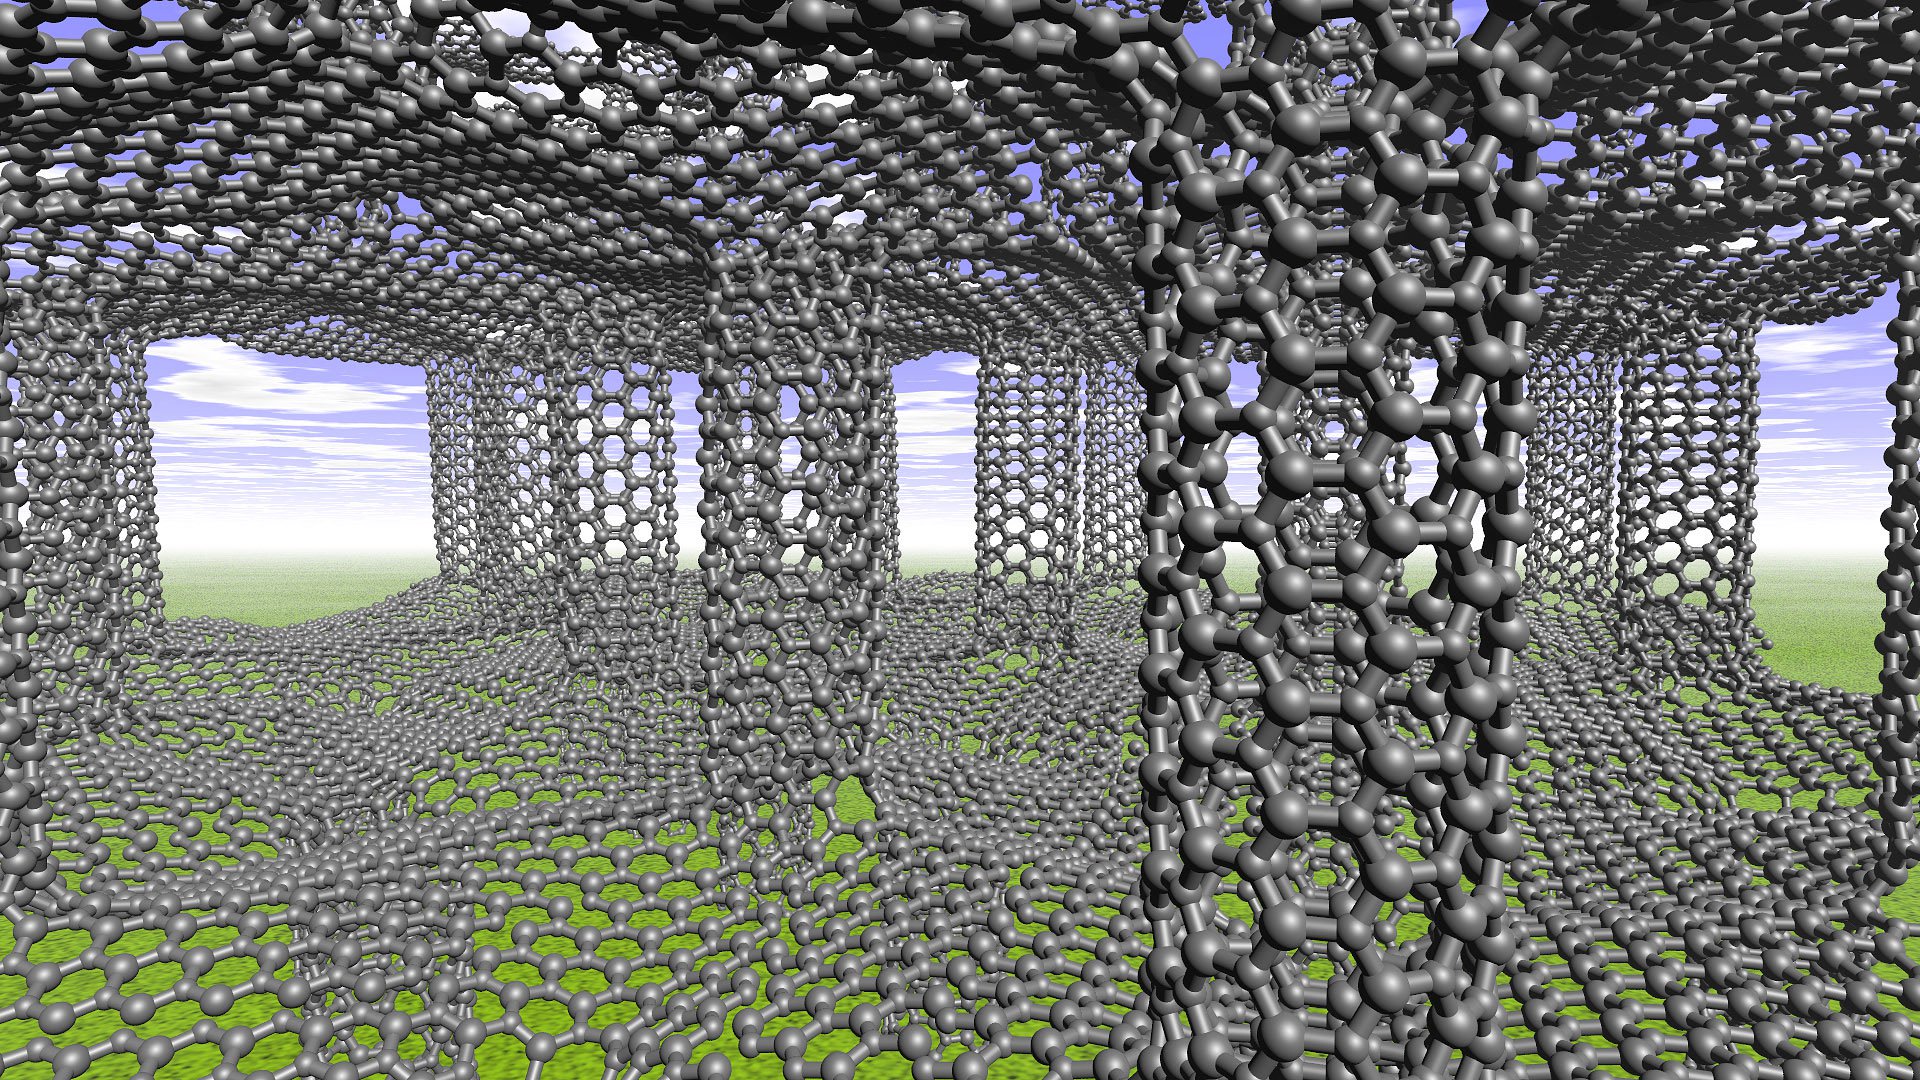 Graphene could solve five major problems of the world